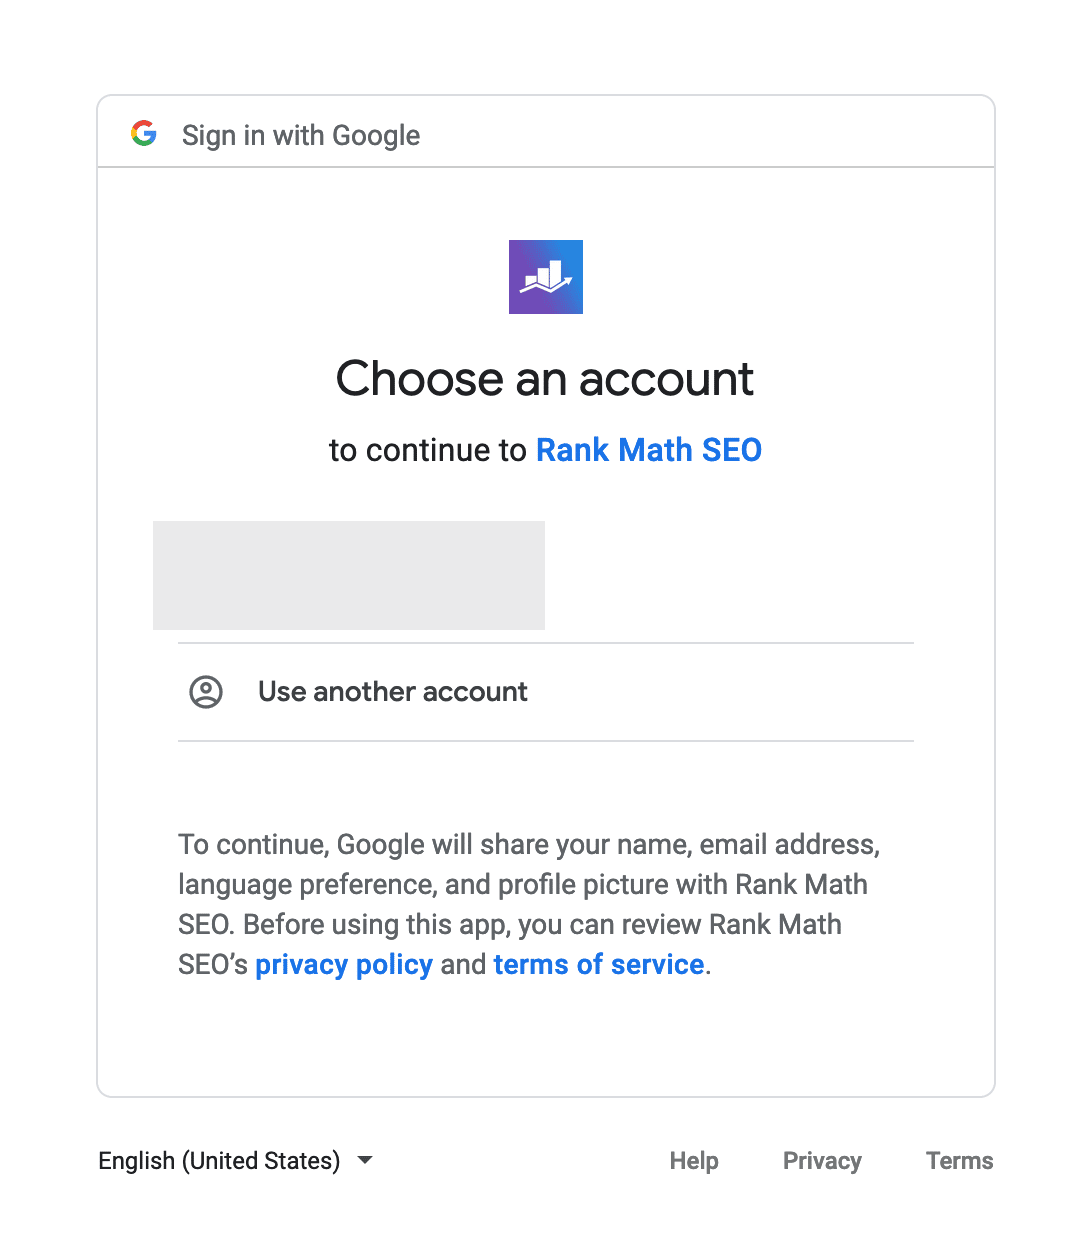 Choose an account to allow Rank Math to access the Google Search Console.